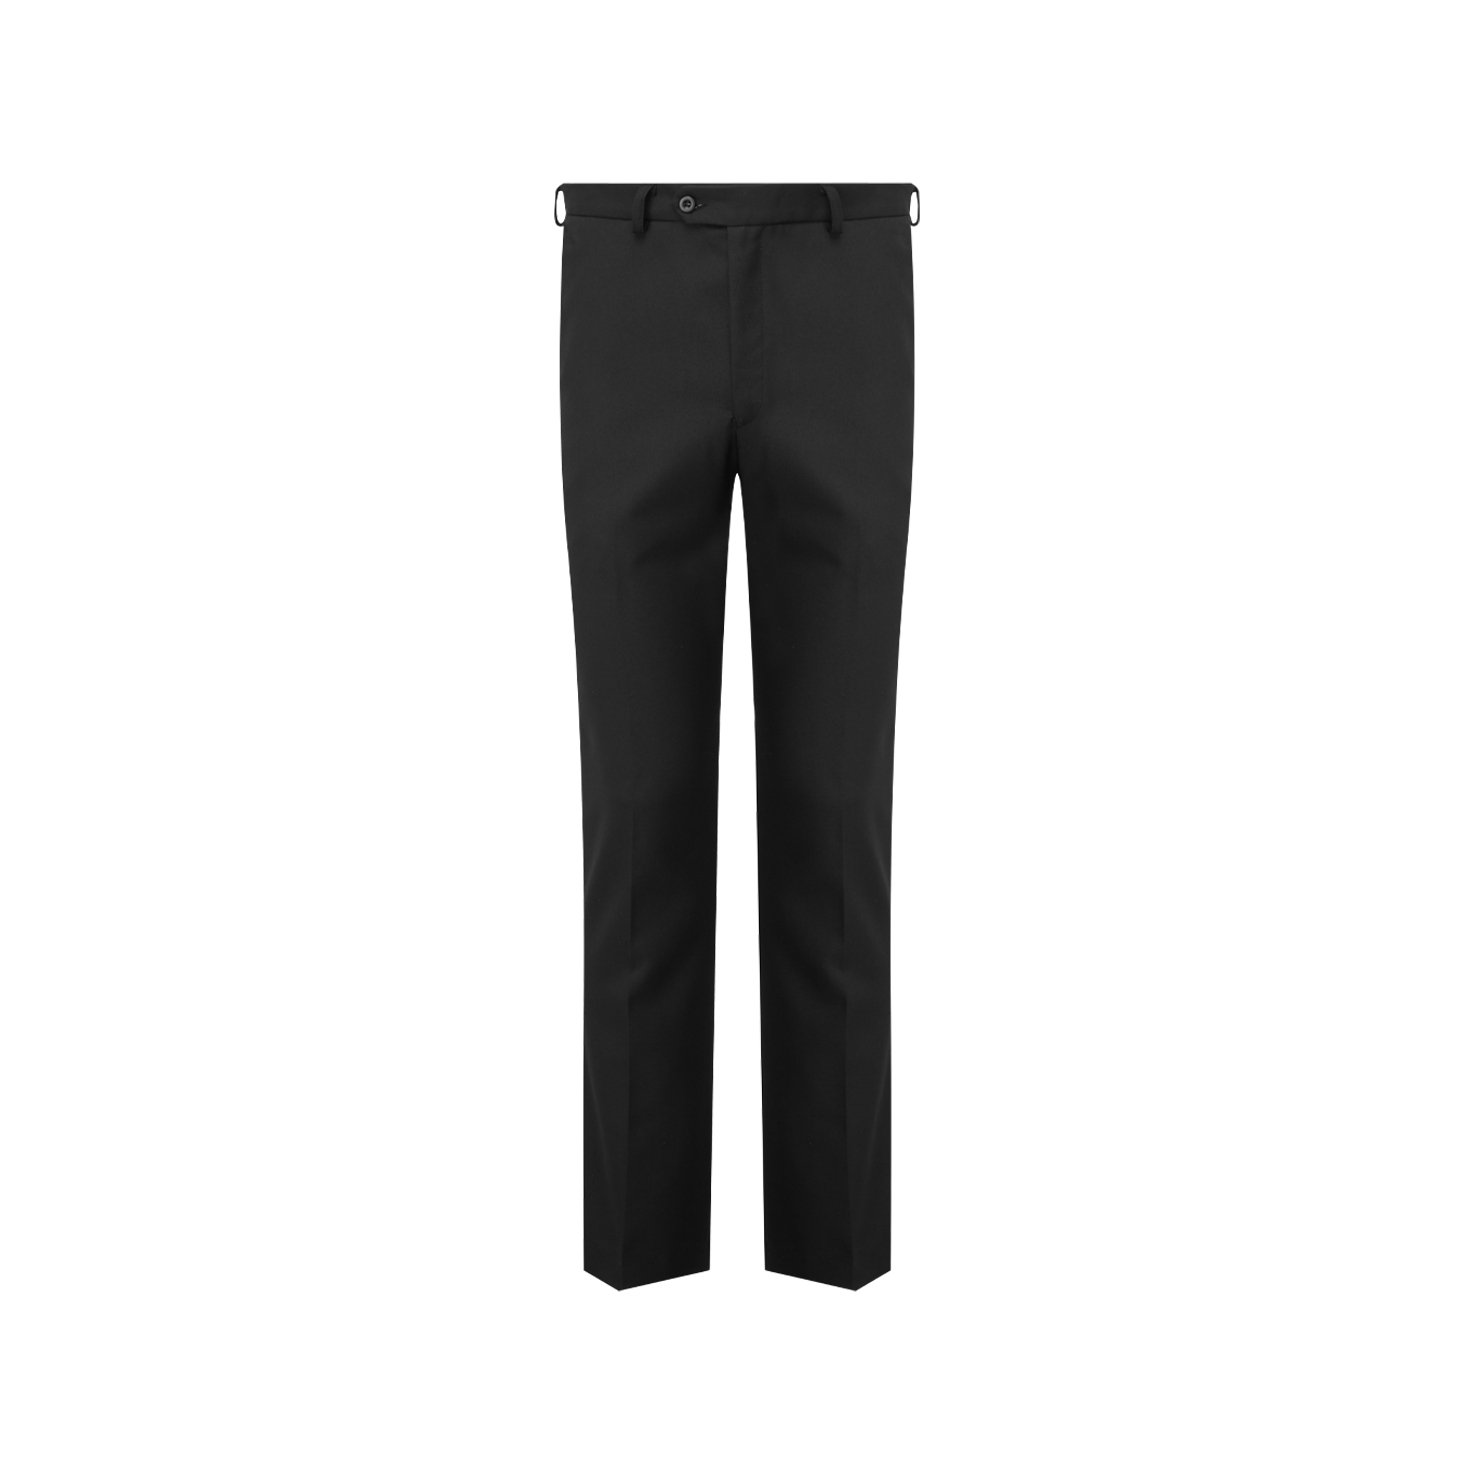 Boys Sturdy School Trousers Black Grey Relaxed Generous Fit Plus Fit Ages  7-16 | eBay